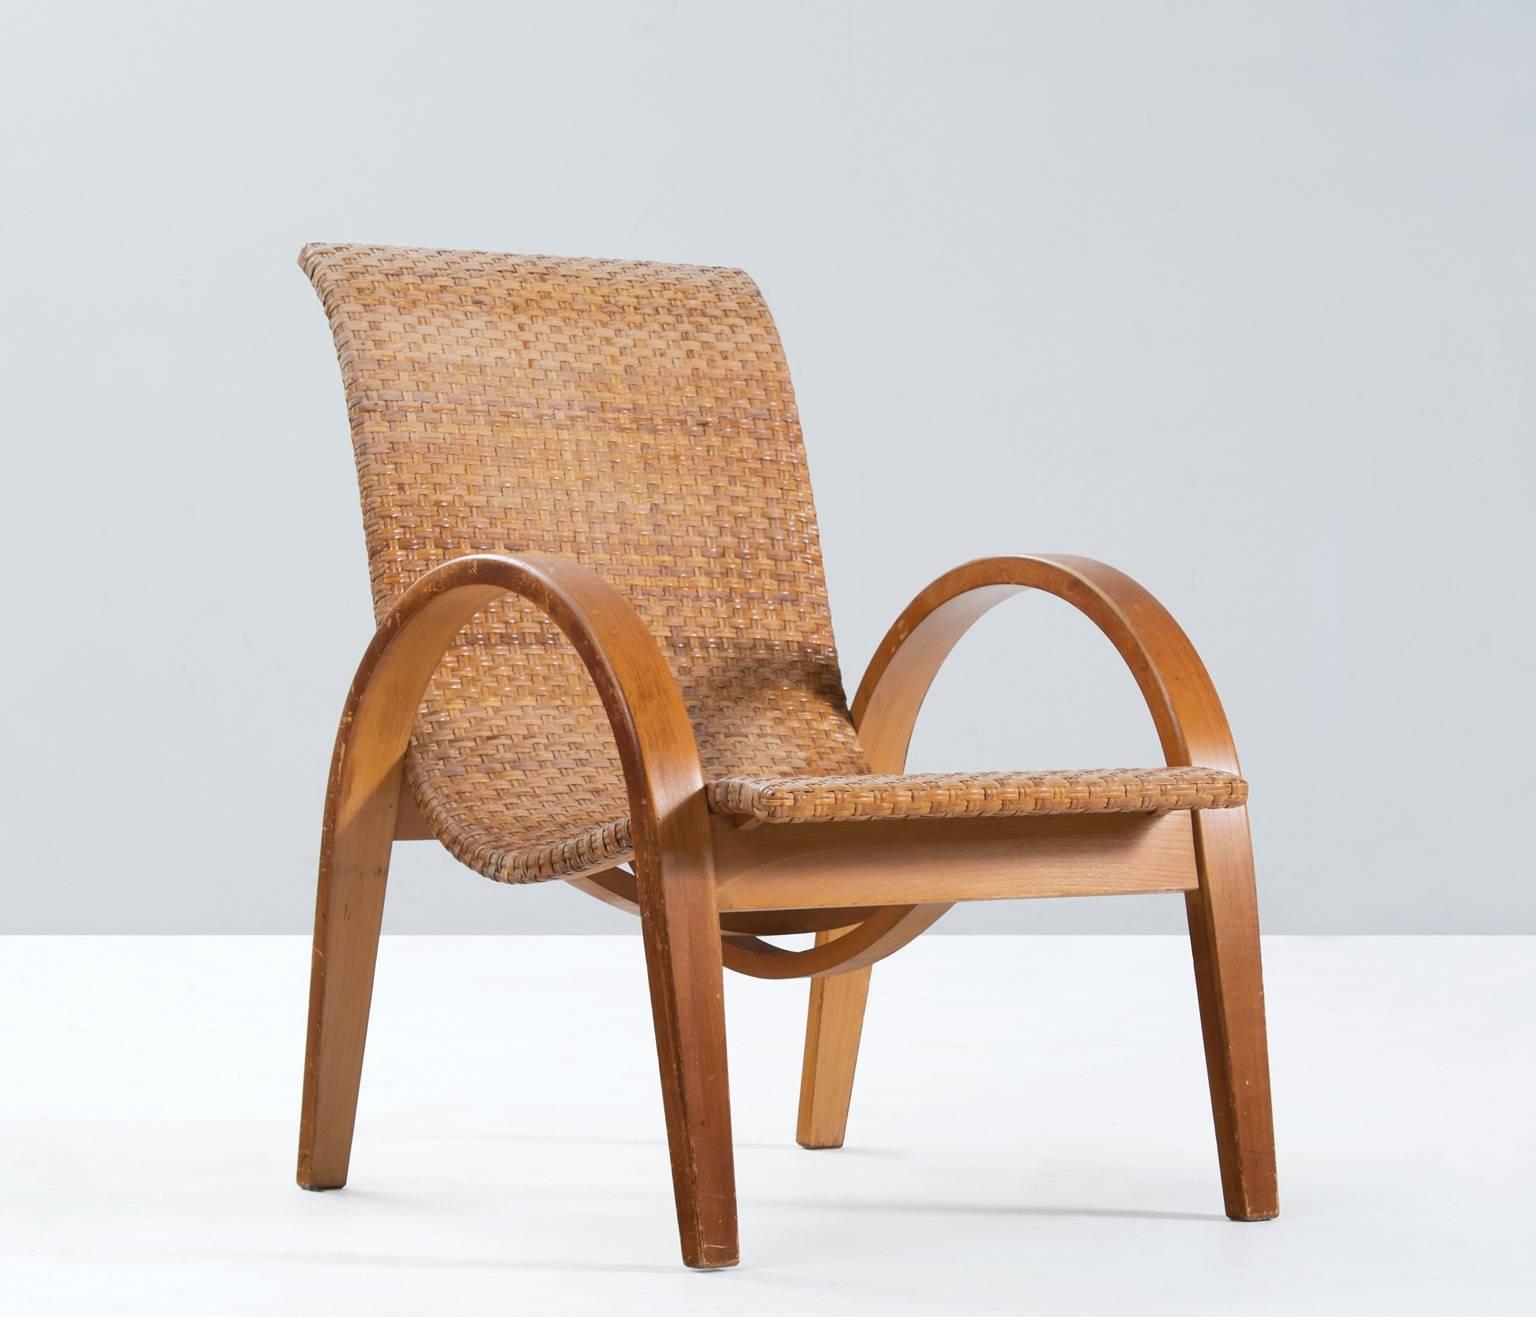 Beautifully curved armchair in solid beech wood, France 1950s.

The solid bent beech wooden frame shows lovely lines, and an interesting construction underneath the seat. The frame has a well made wicker seat element.

Due to the well designed